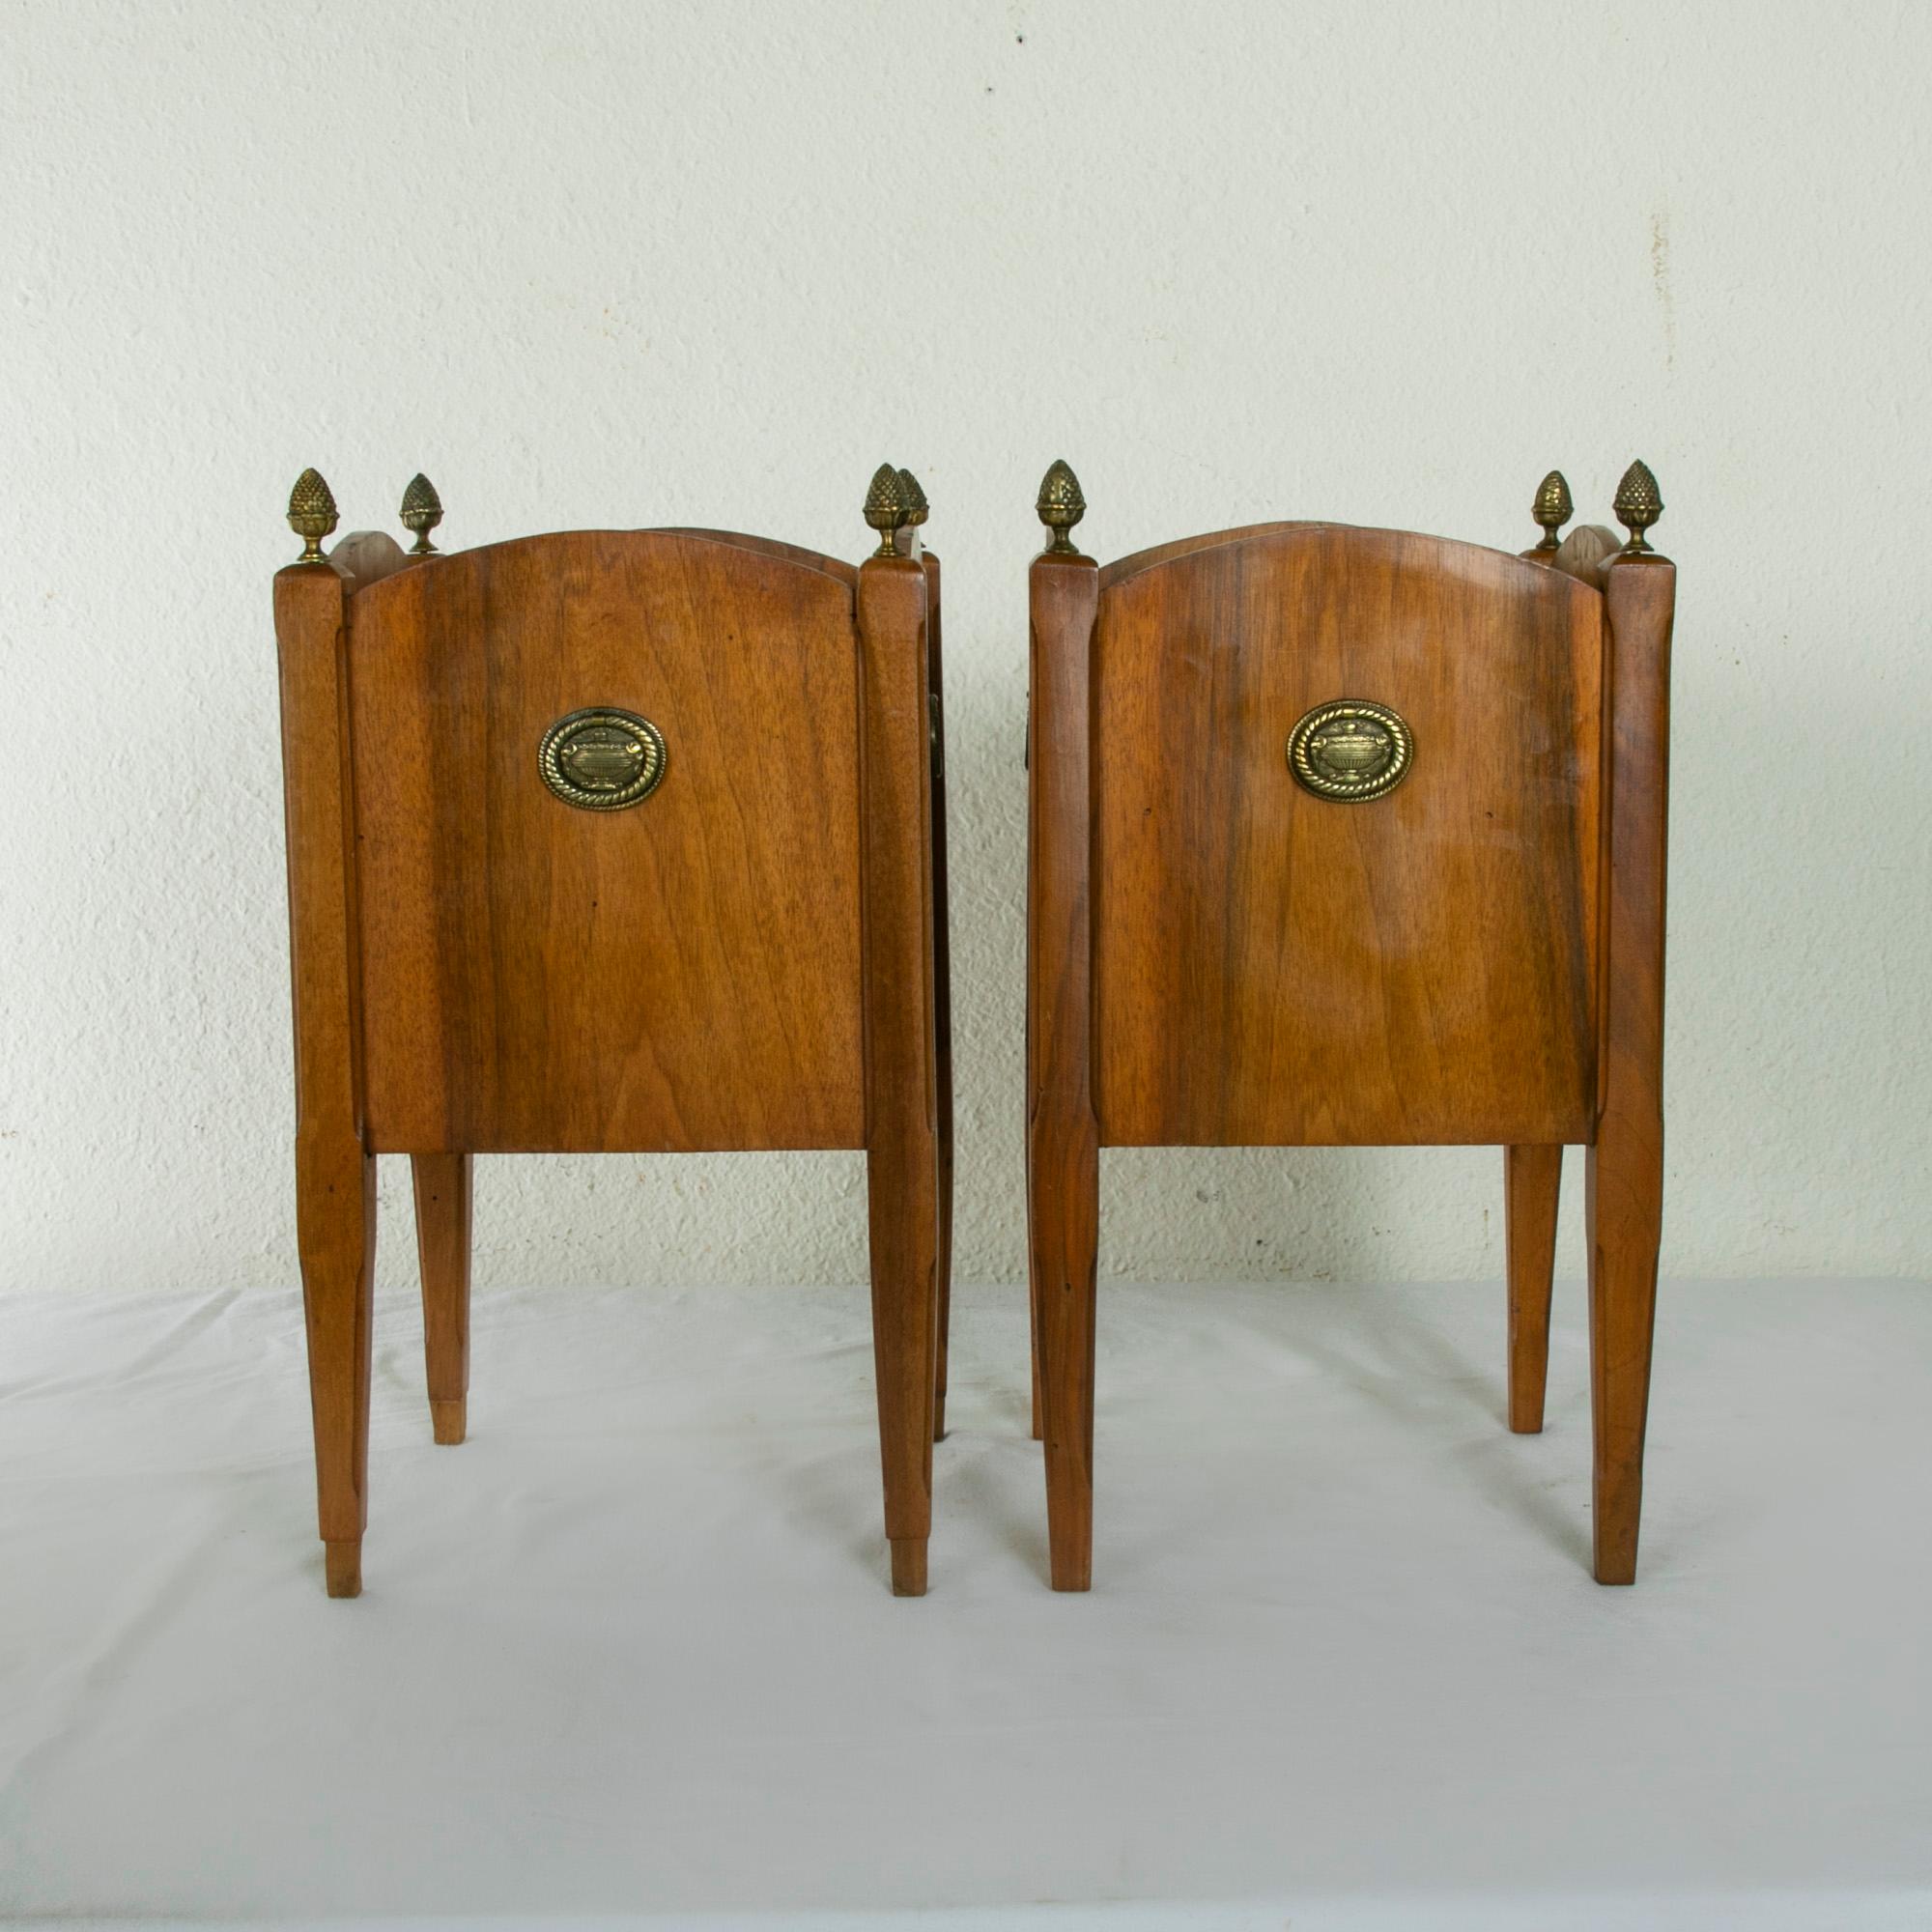 Pair of Mid-Century English Louis XVI Style Walnut Cachepots or Planters In Good Condition For Sale In Fayetteville, AR